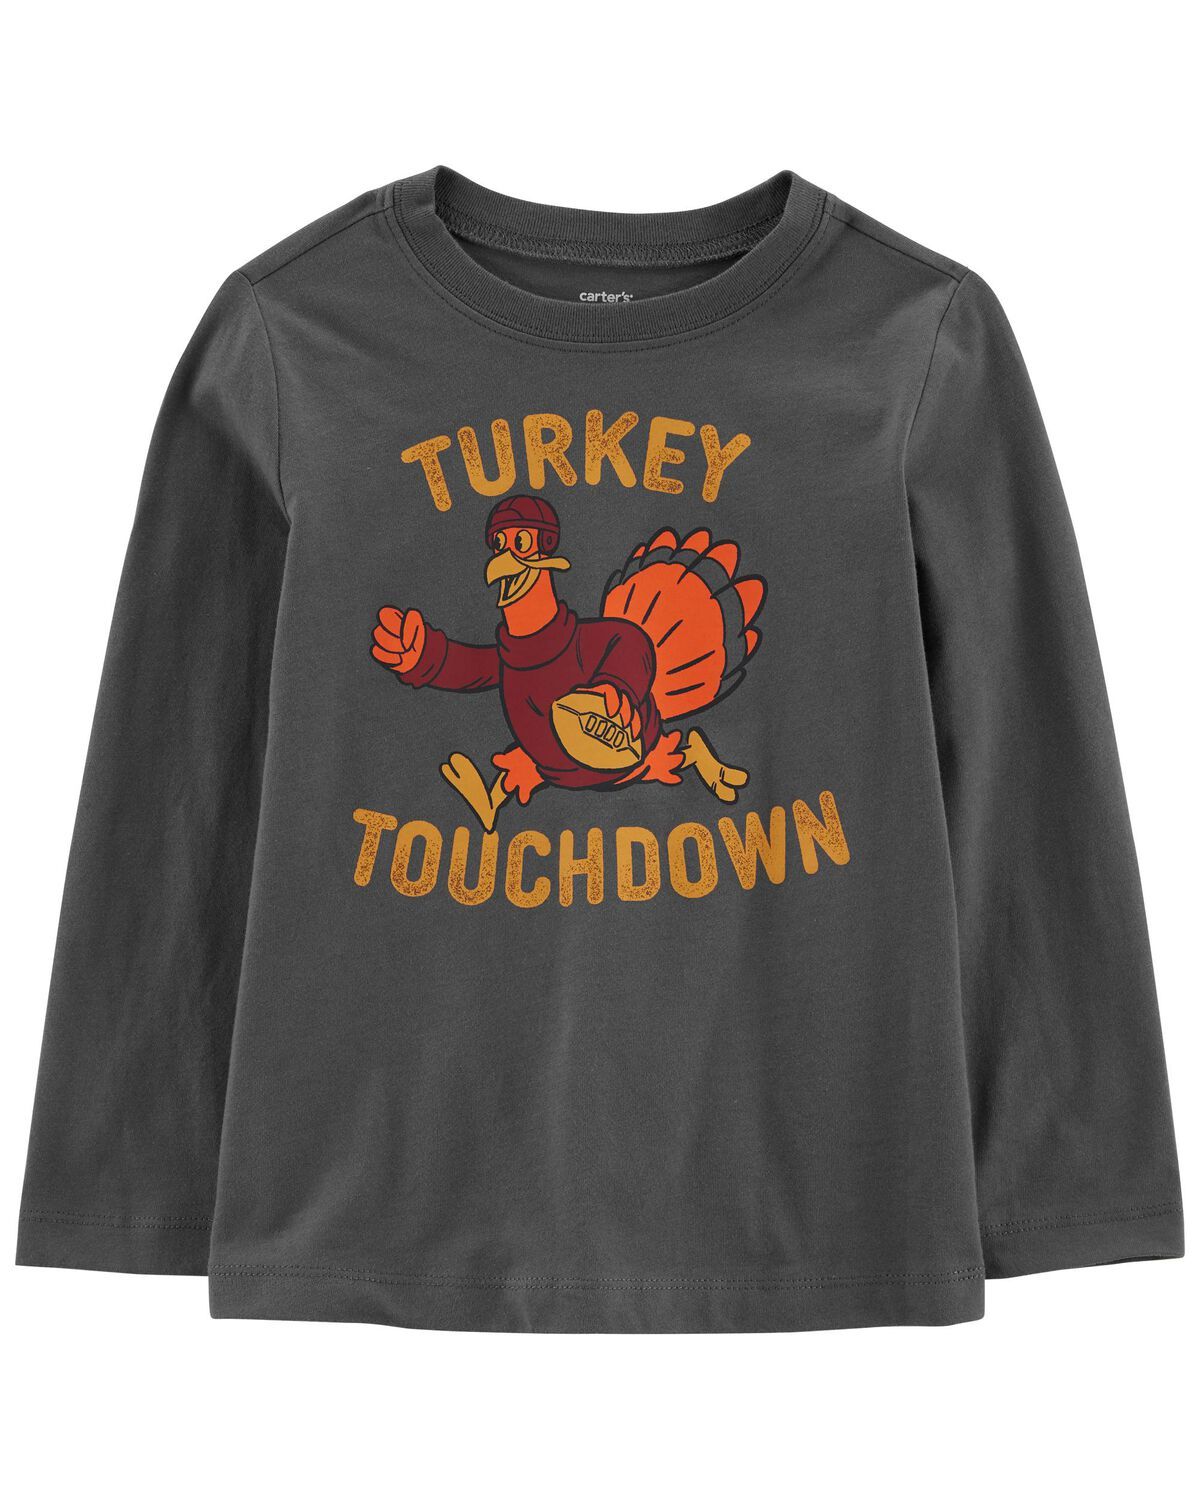 Grey Toddler Turkey Touchdown Graphic Tee | carters.com | Carter's